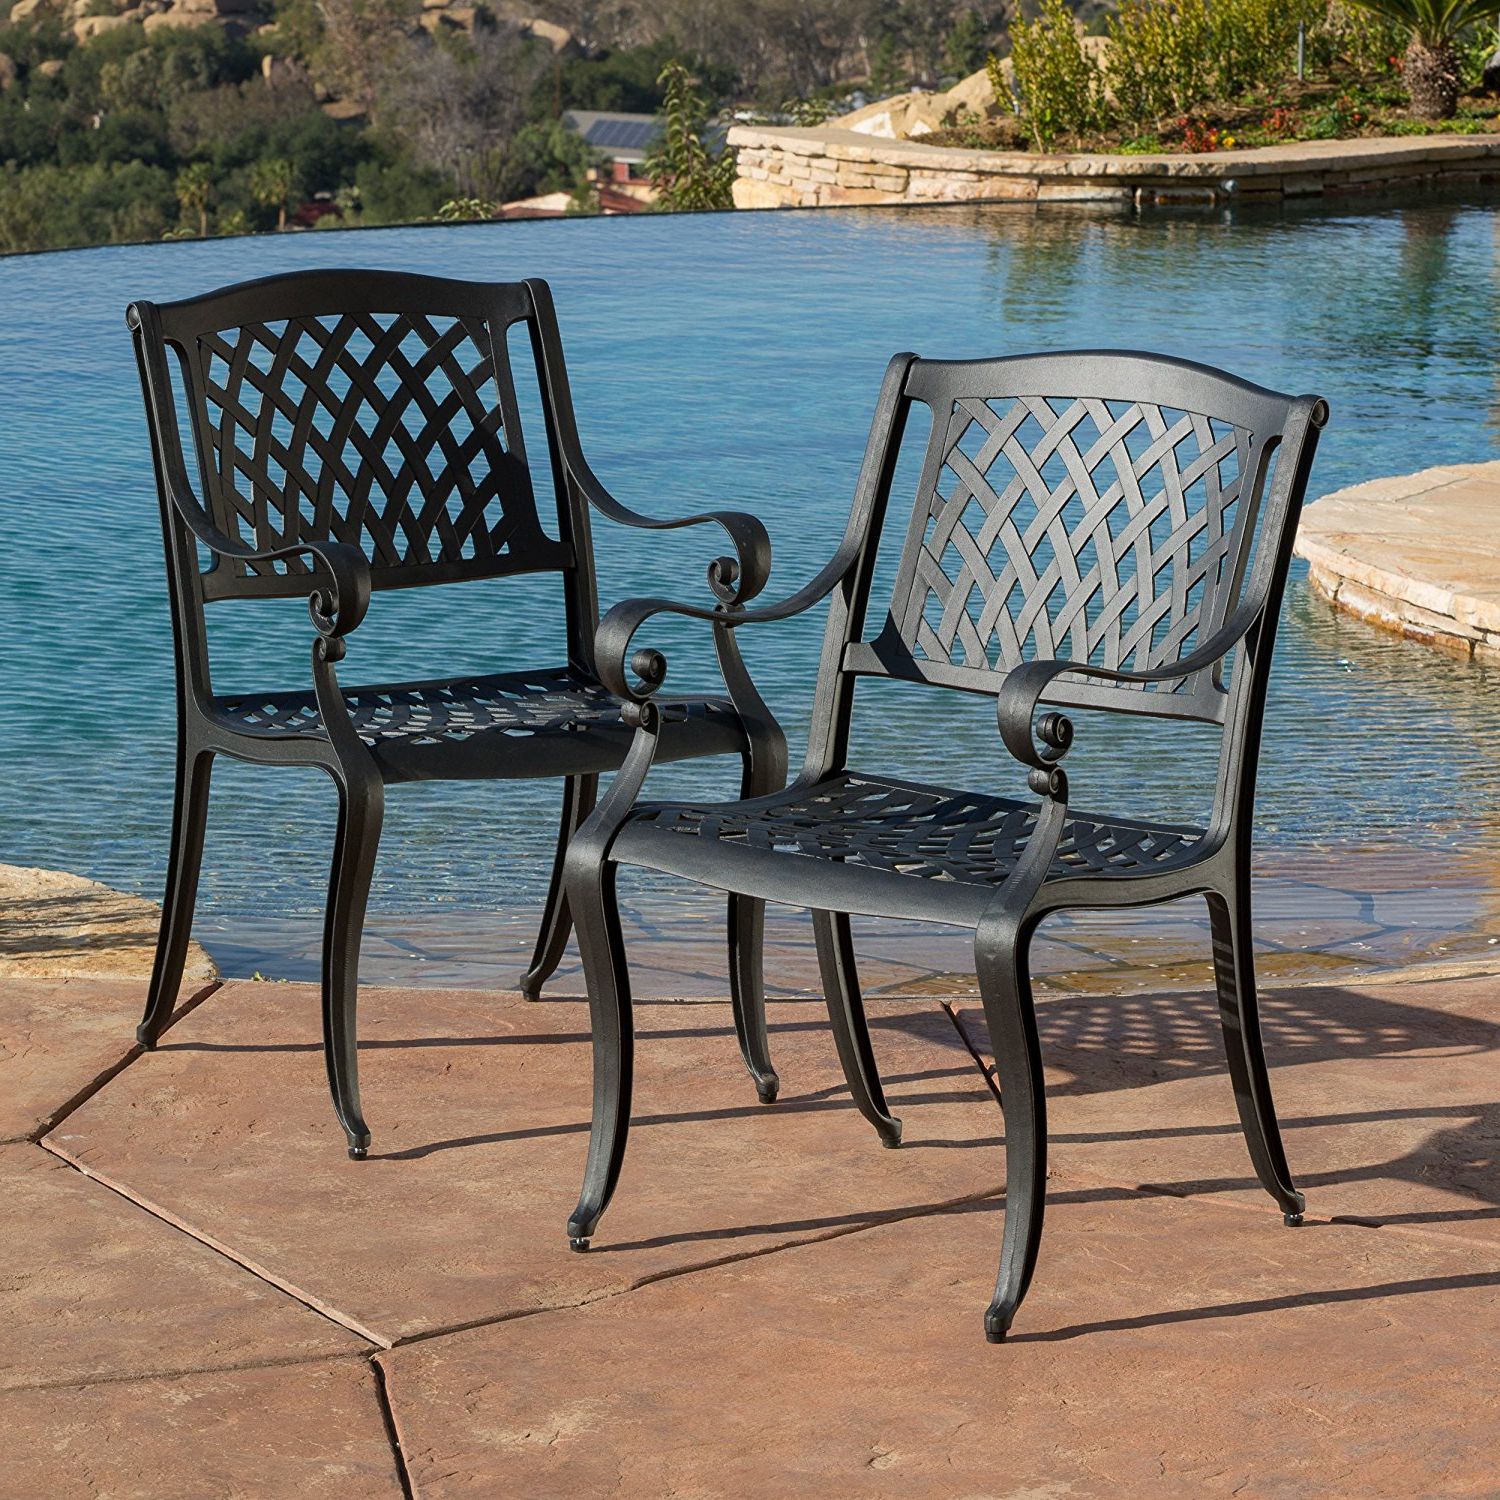 Best Patio Pertaining To 7 Piece Patio Dining Sets (View 15 of 15)